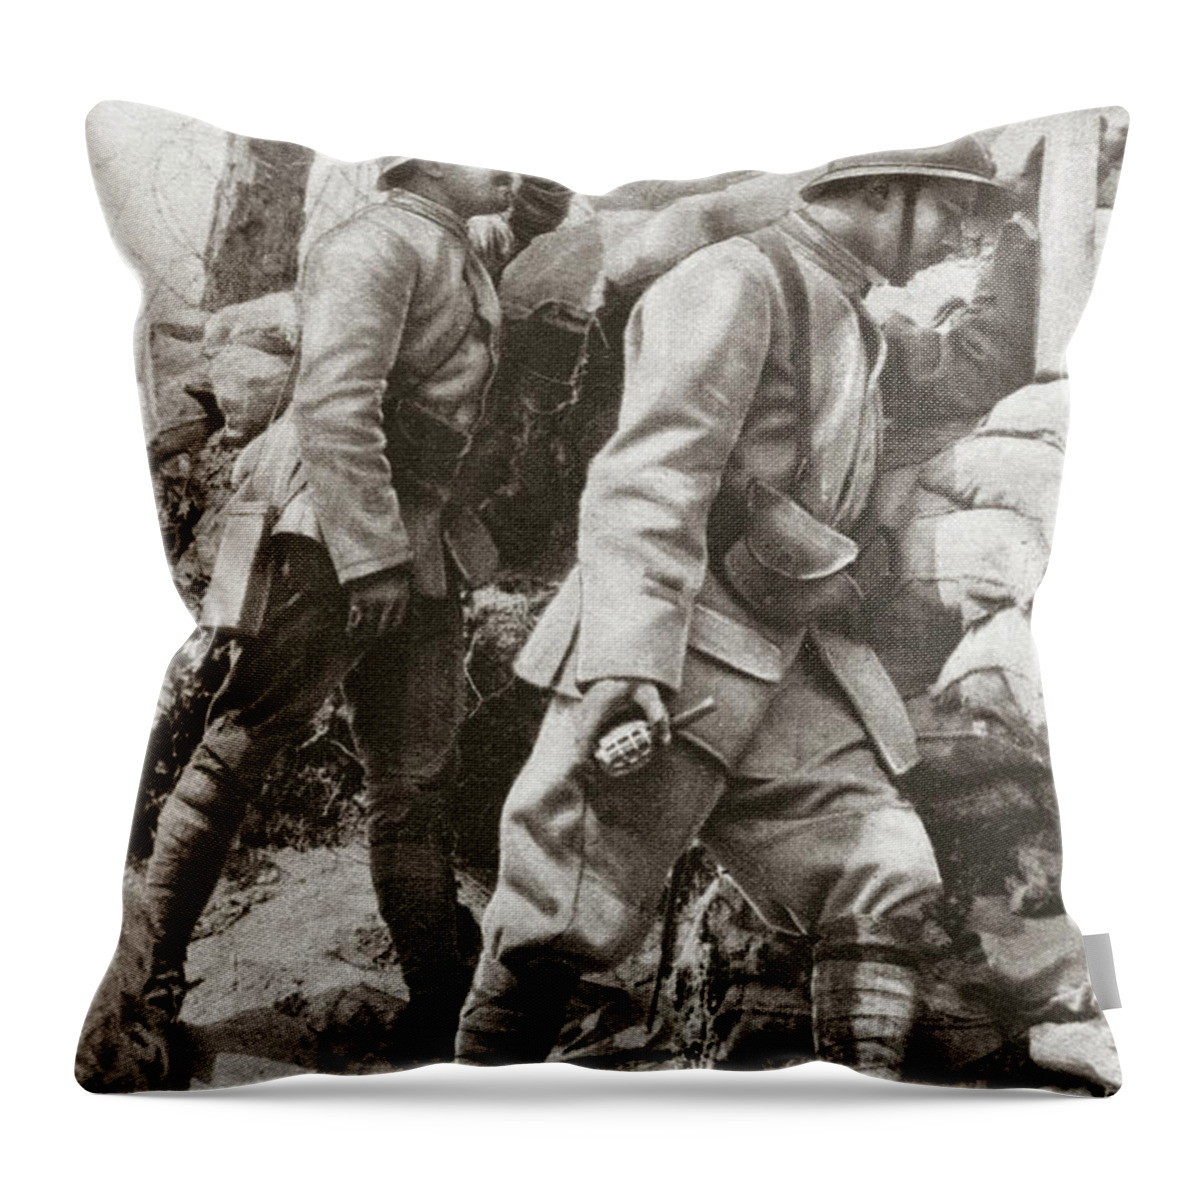 1914 Throw Pillow featuring the photograph World War I French Troops #7 by Granger